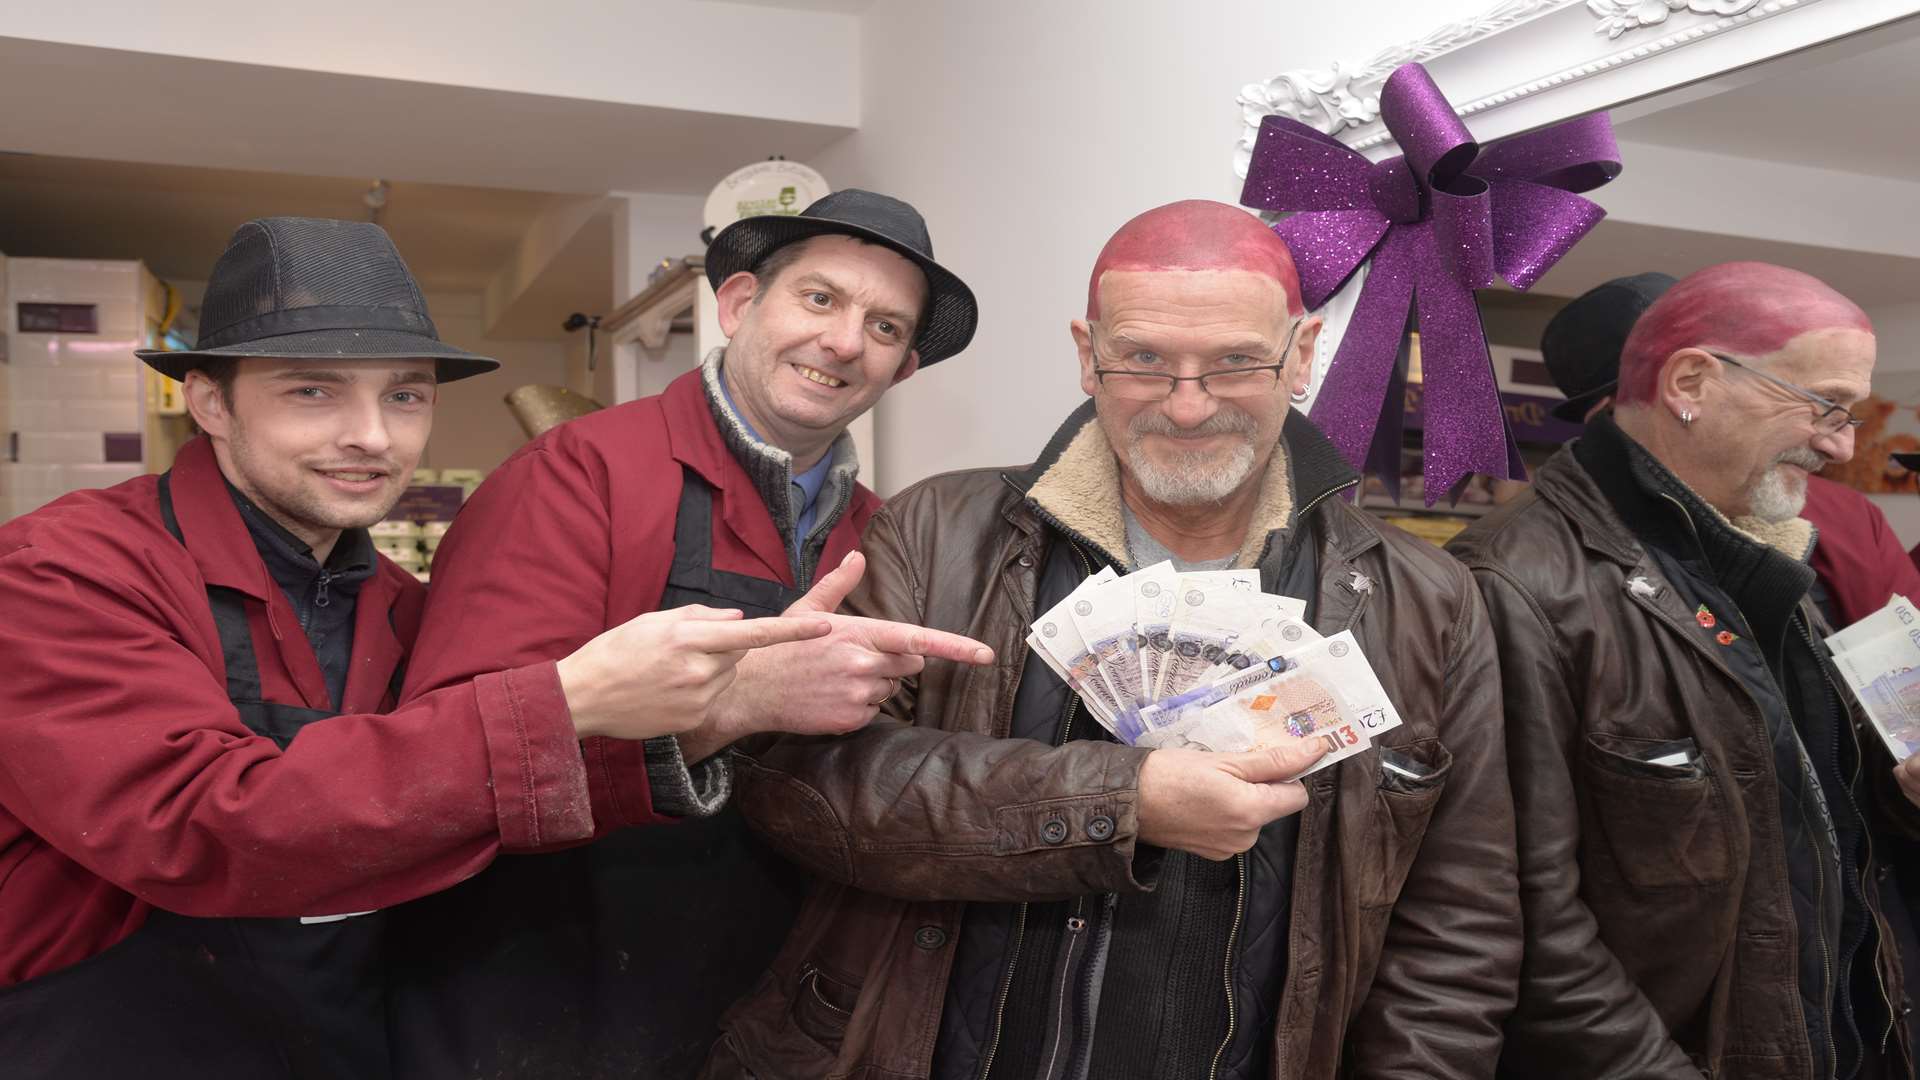 Ricky Wheatley and Darren Longhurst present Patrick Kennedy-Sanigar with the cash after he had his head died purple at the Butcher of Brogdale in Whitstable.